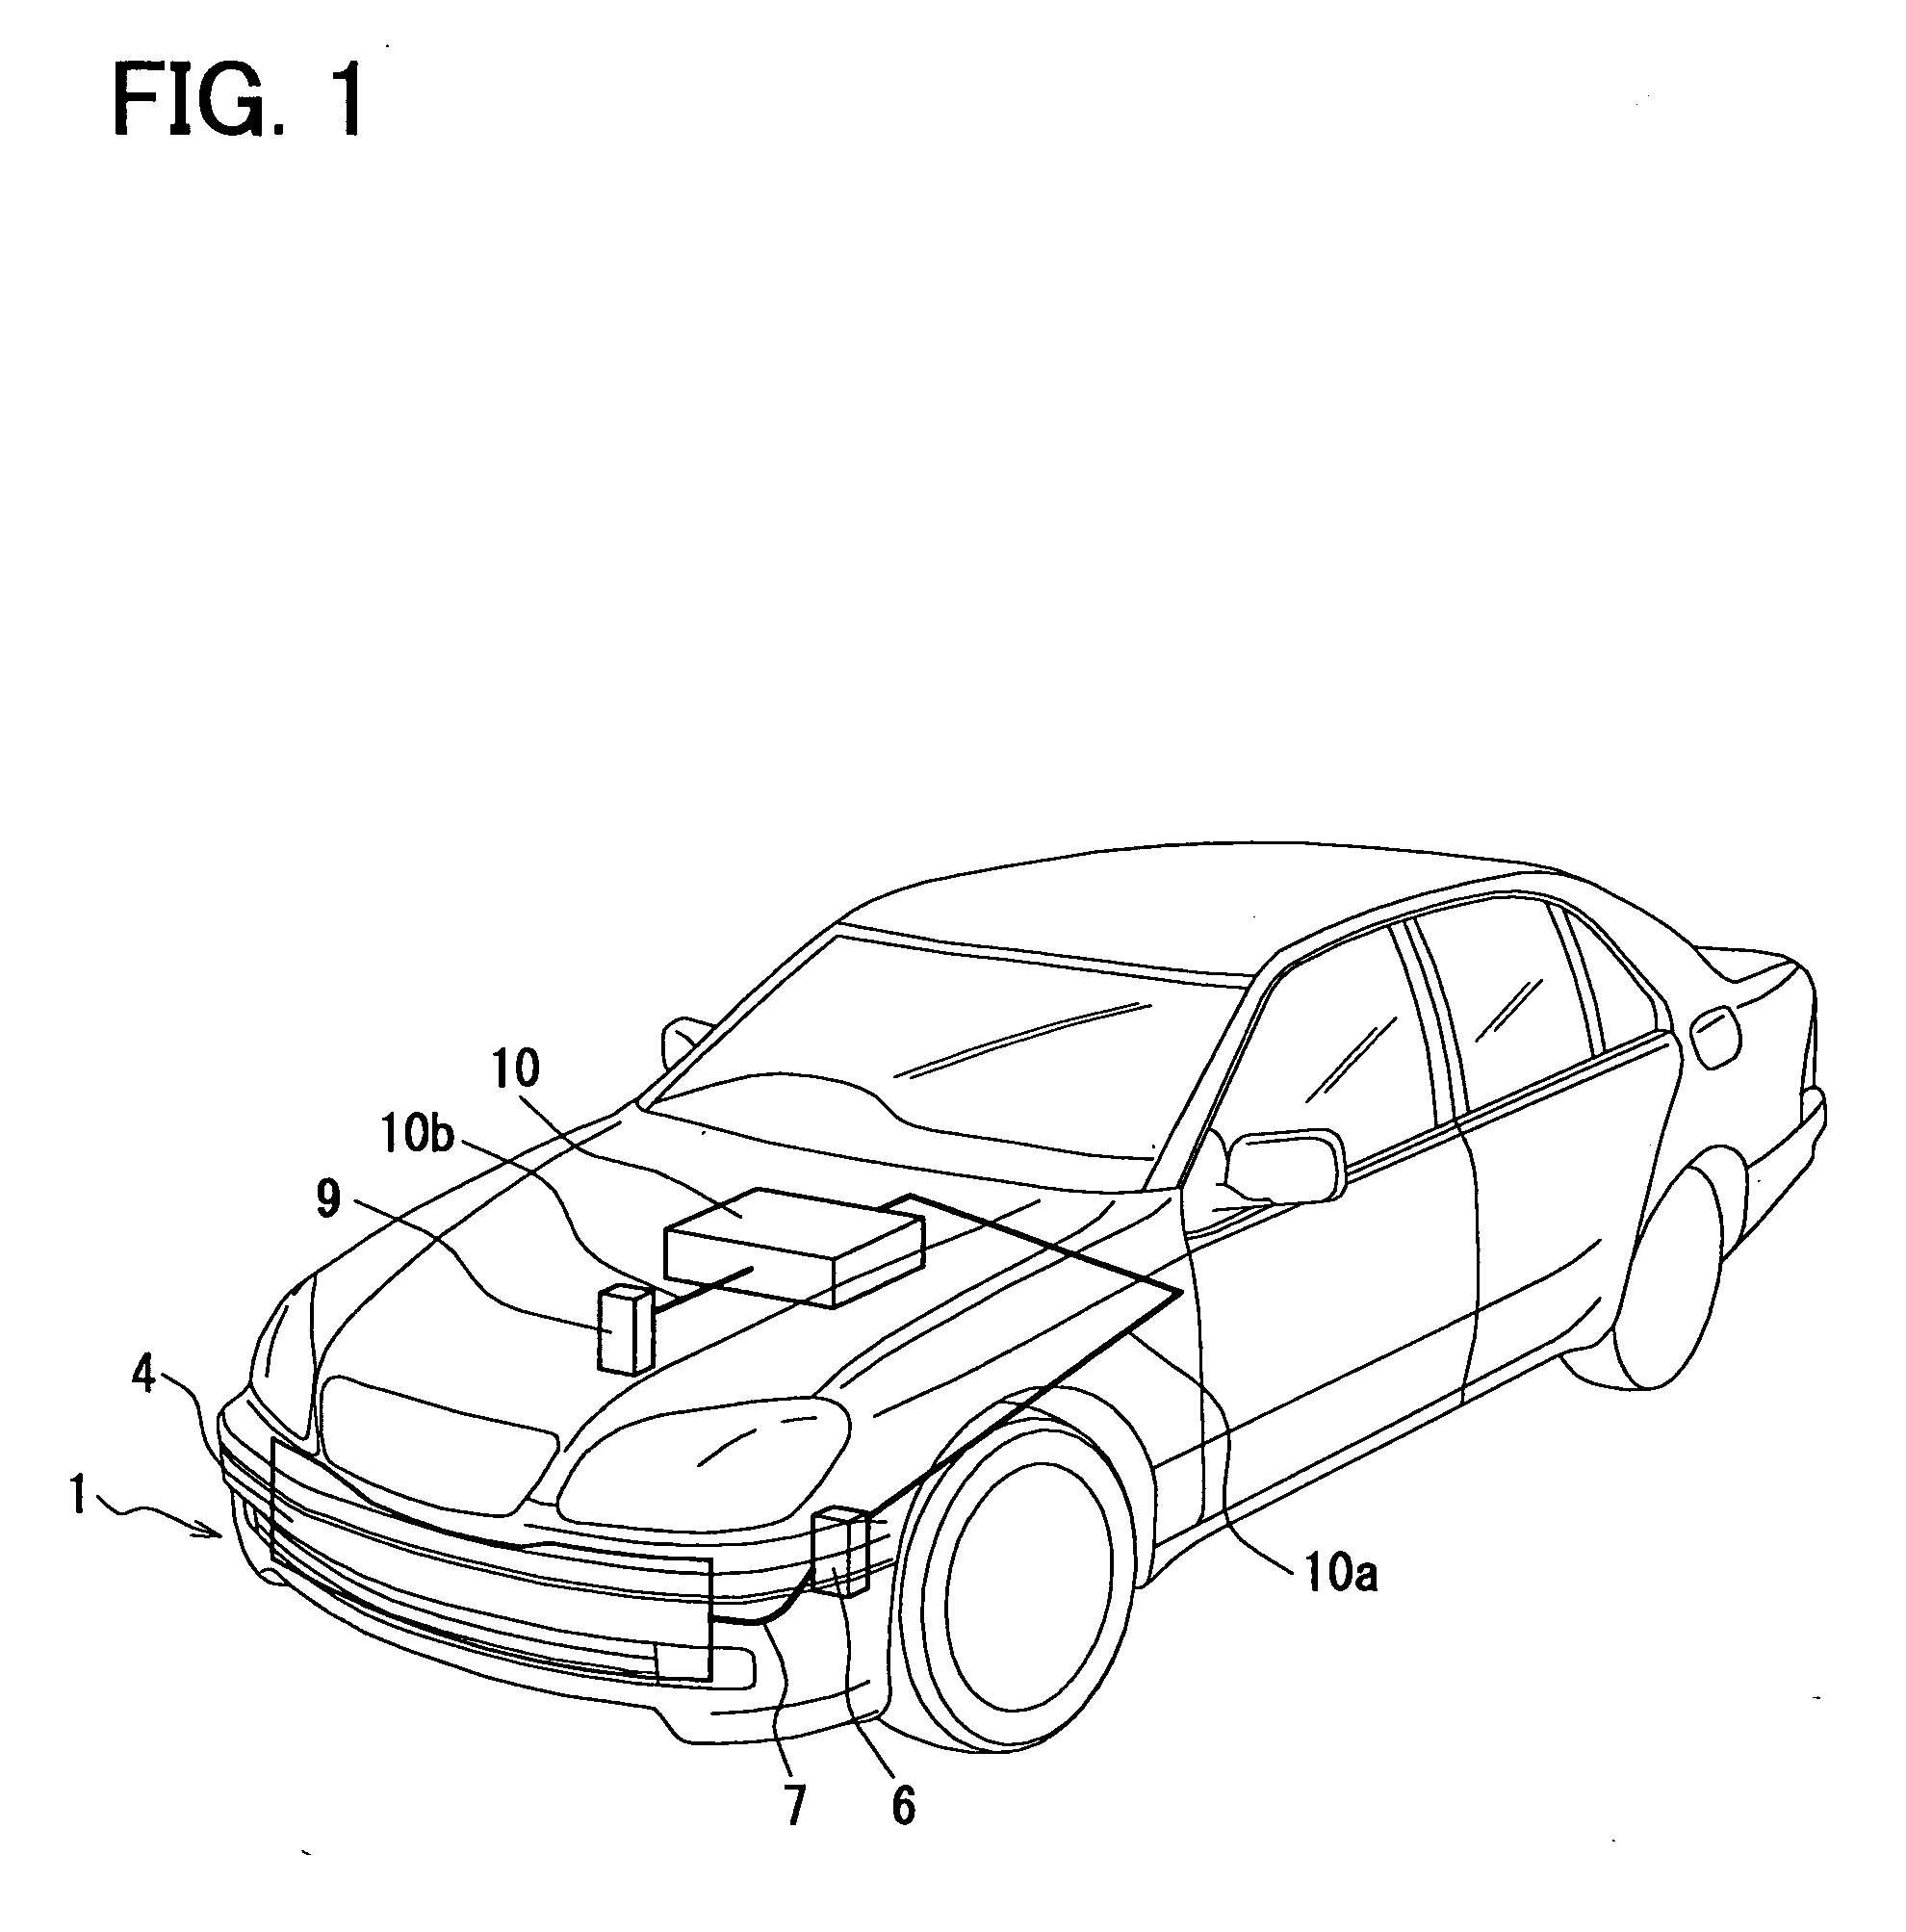 Obstacle discrimination device for vehicle